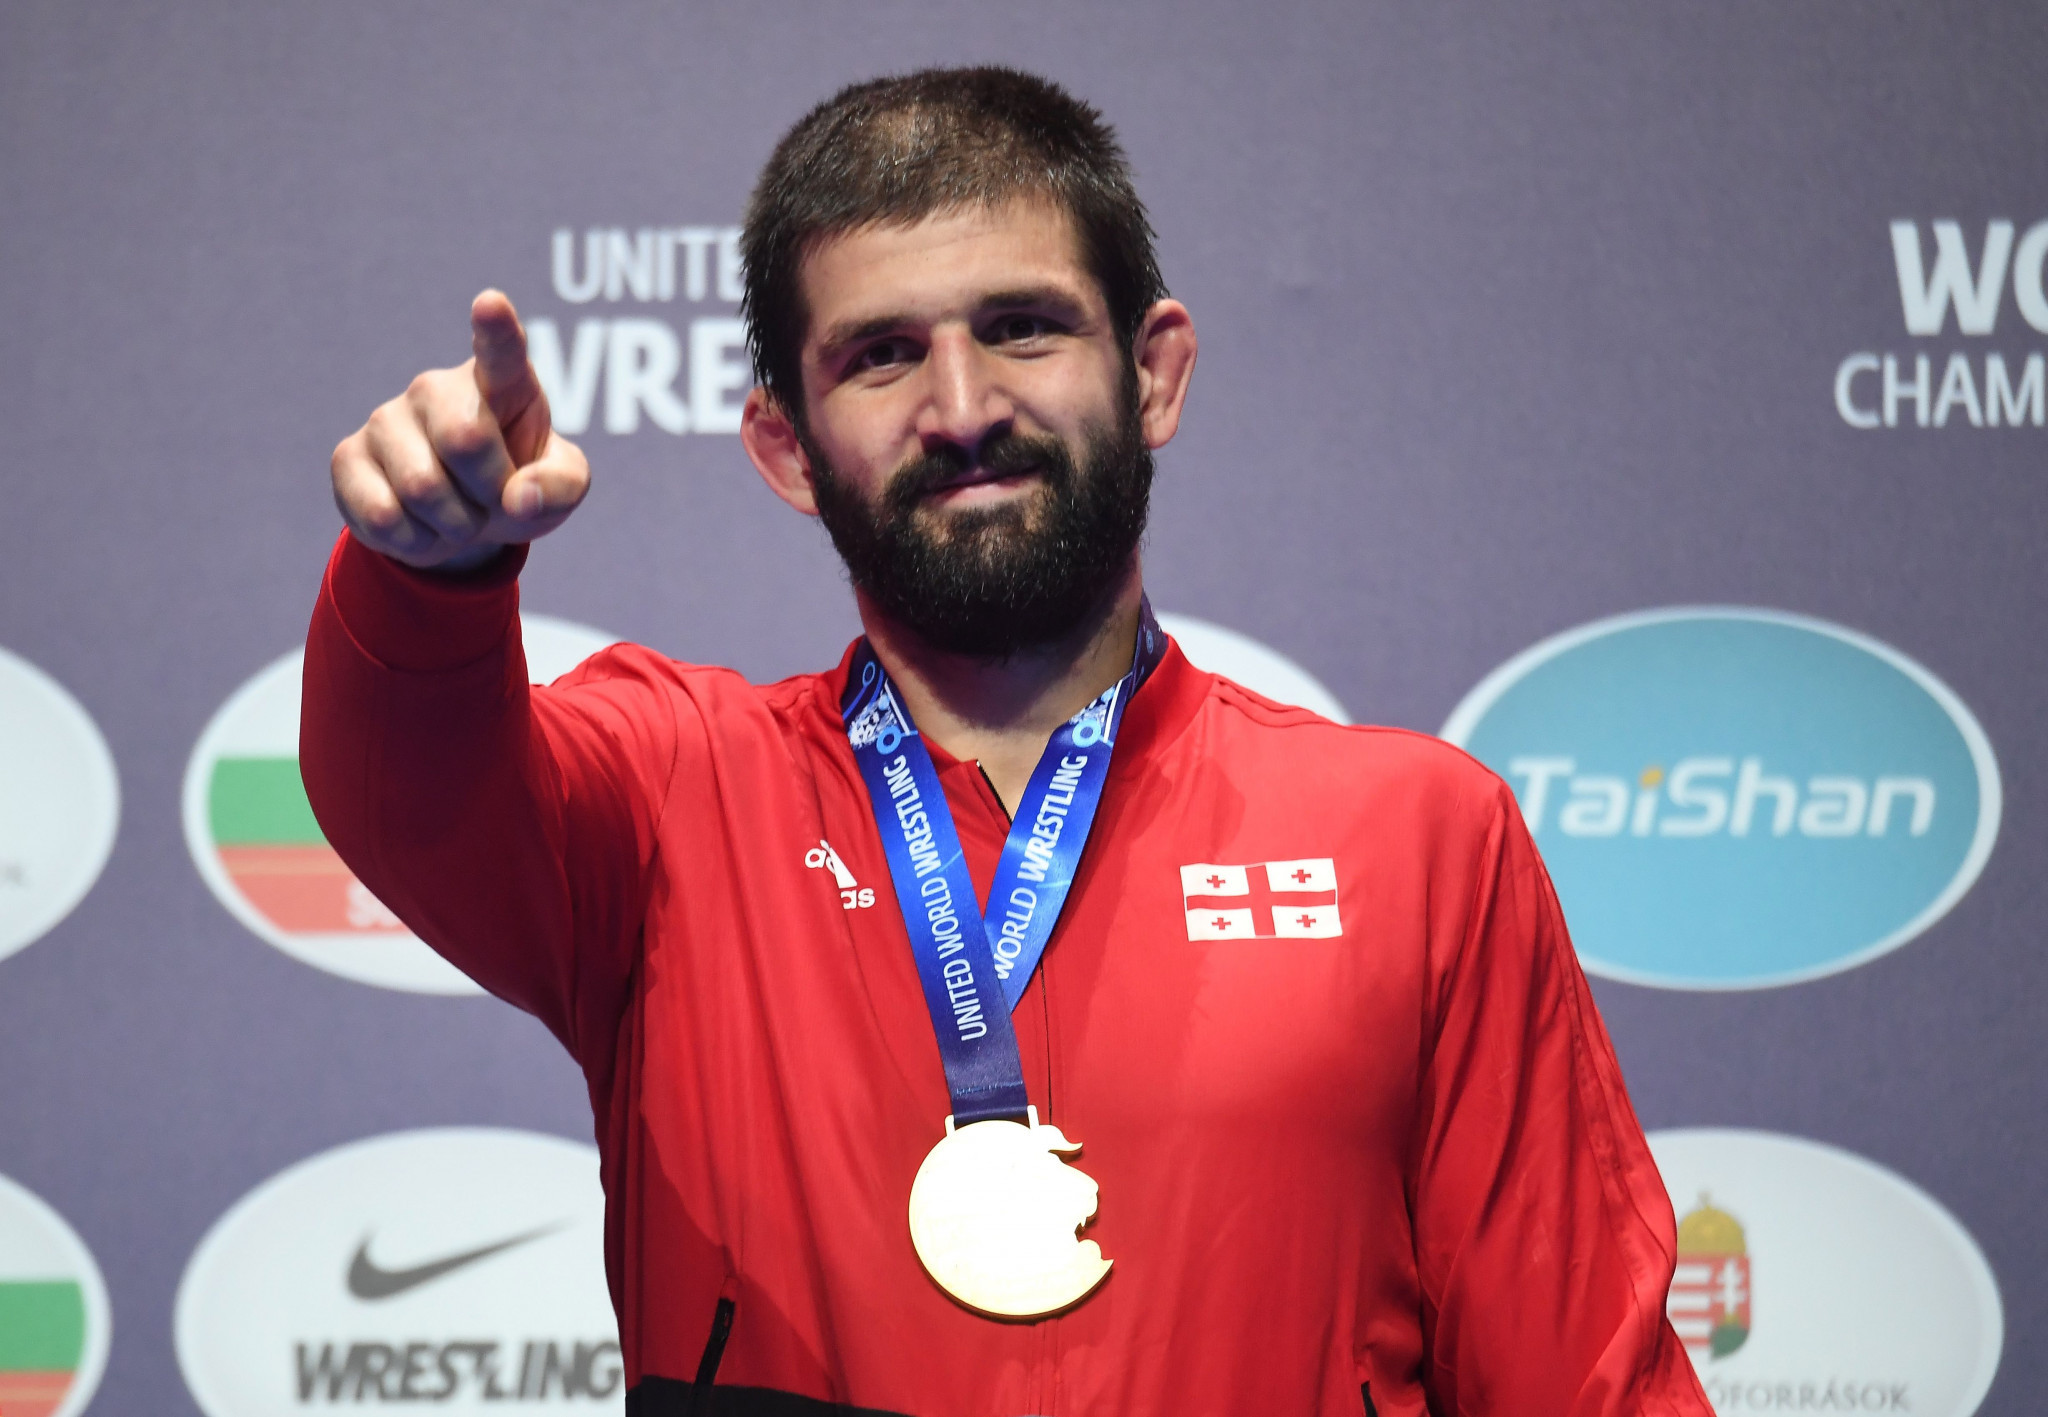 In the 125kg class Georgia's Geno Petriashvili defended his title, having also won gold at the 2017 World Championships in Paris ©Getty Images